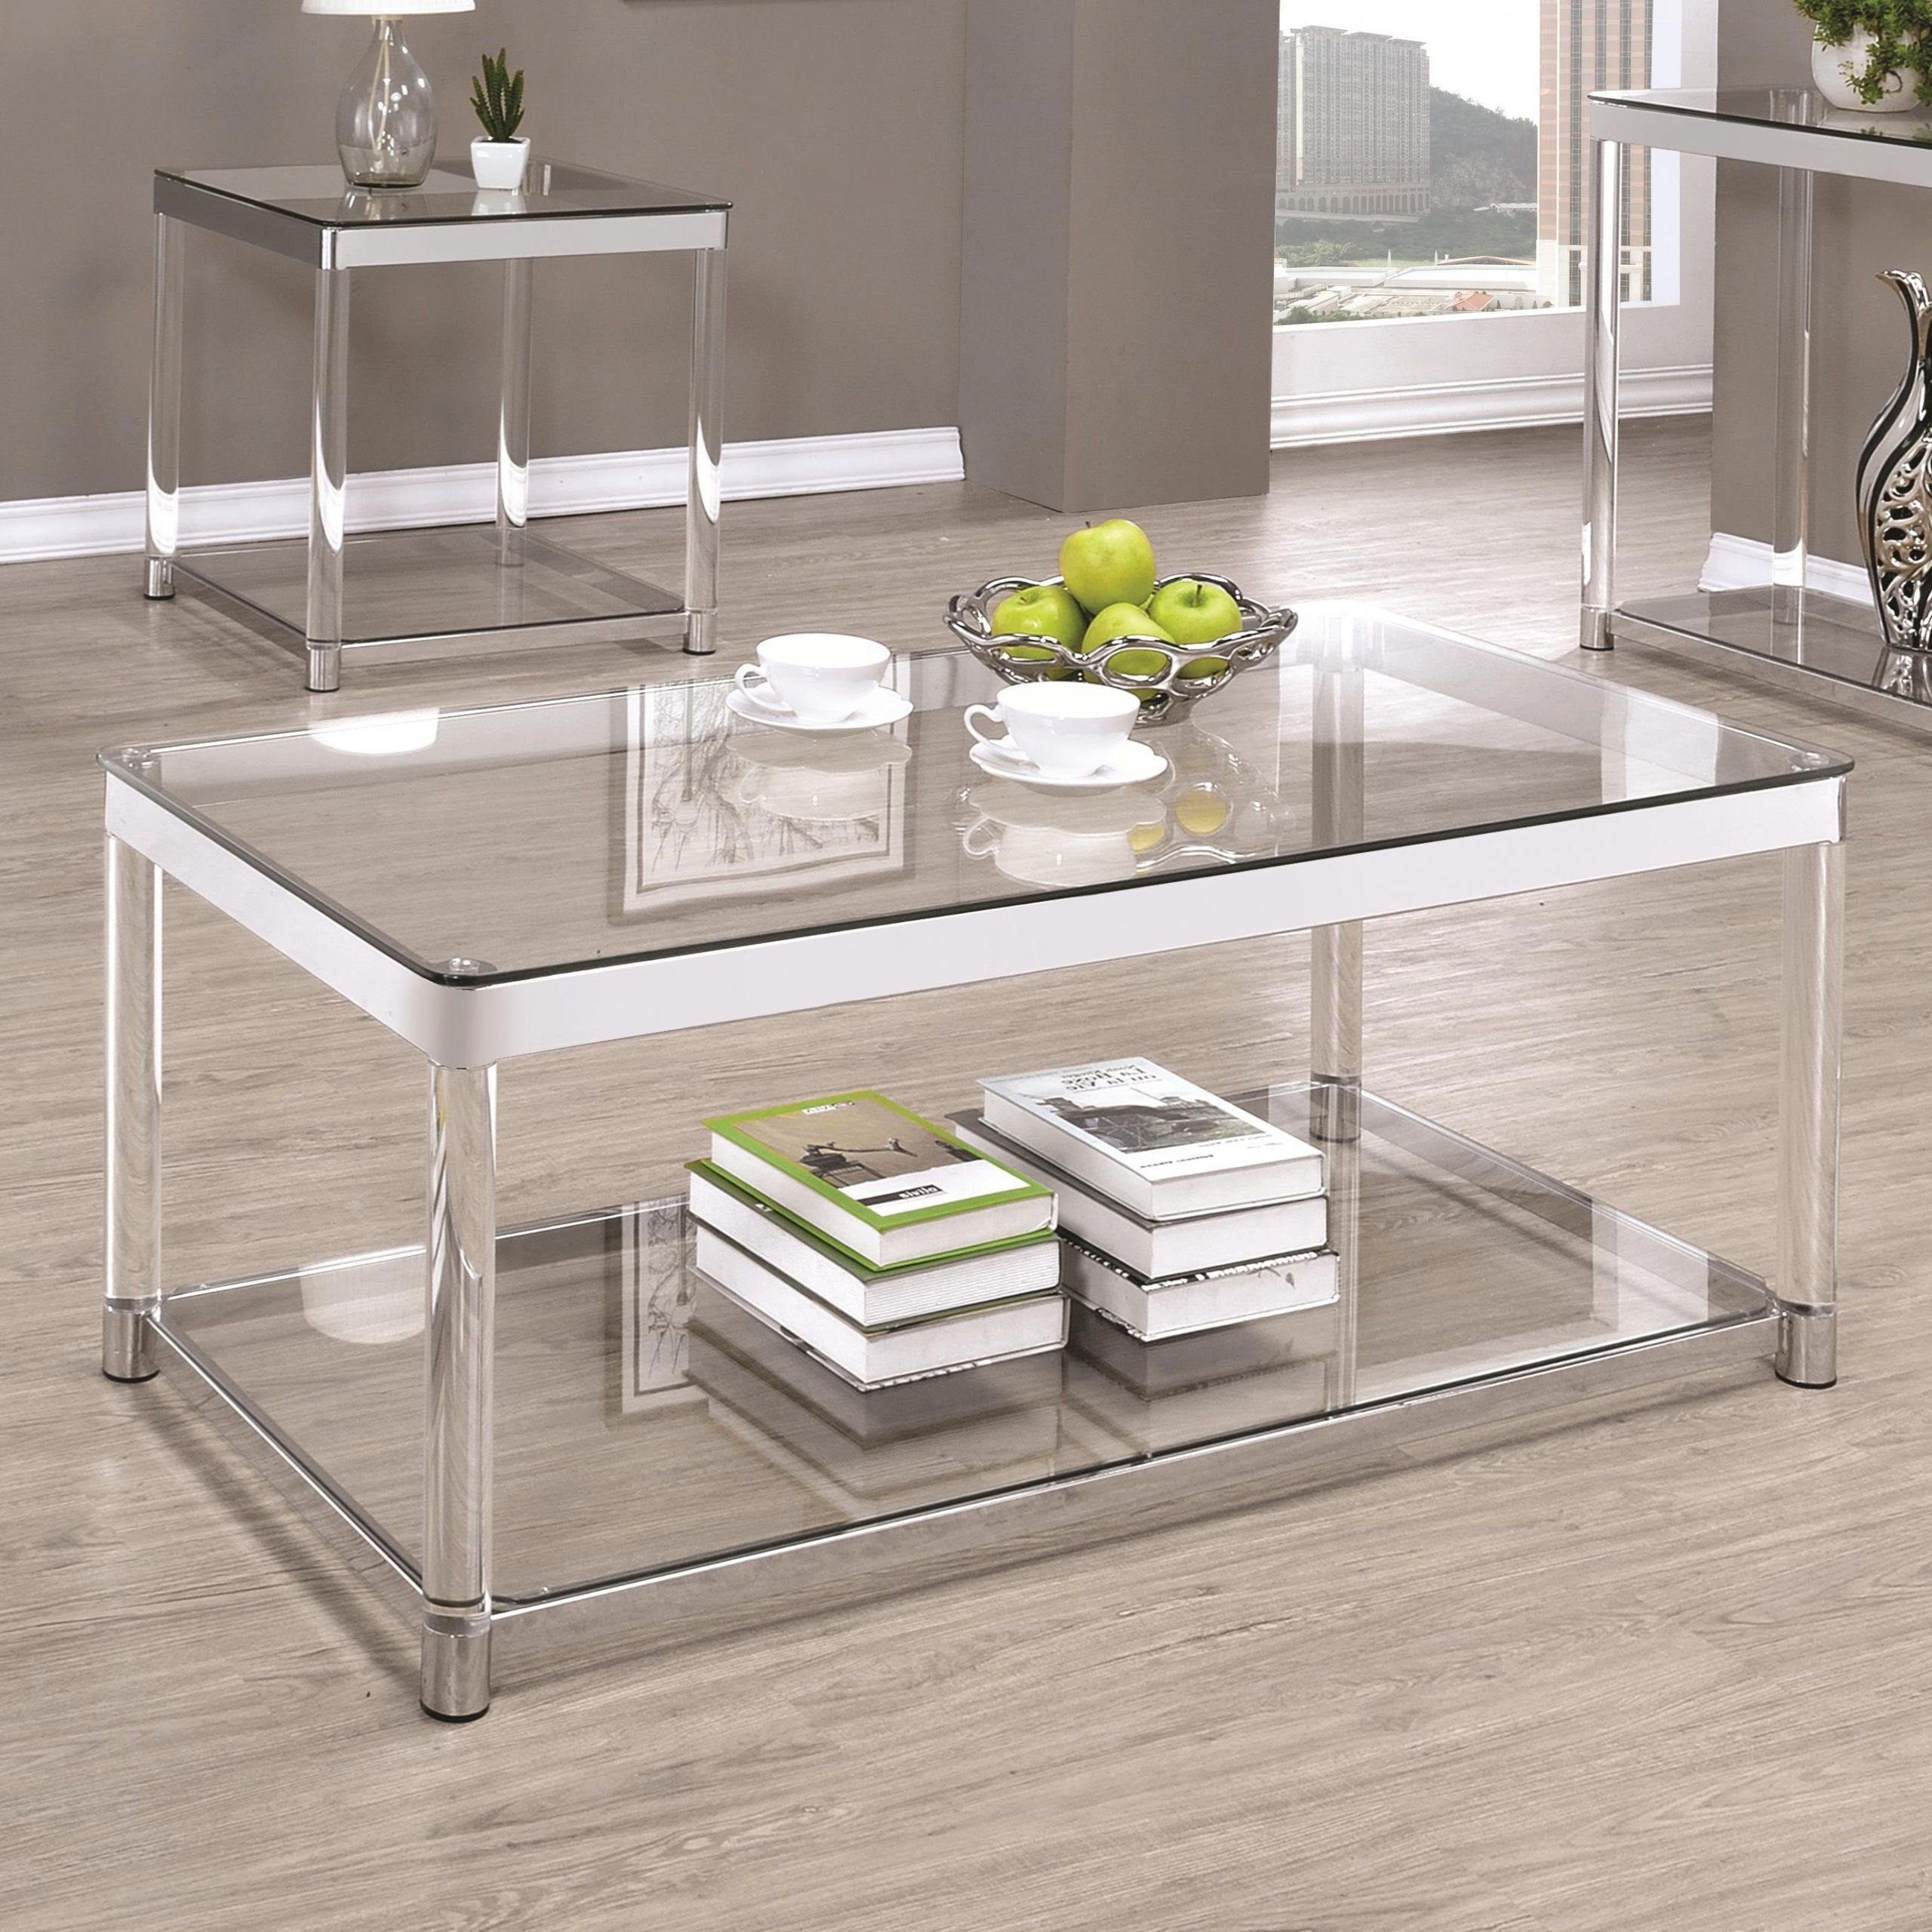 Famous Coaster 72074 Contemporary Glass Top Coffee Table With Acrylic Legs With Regard To Glass Top Coffee Tables (View 2 of 15)